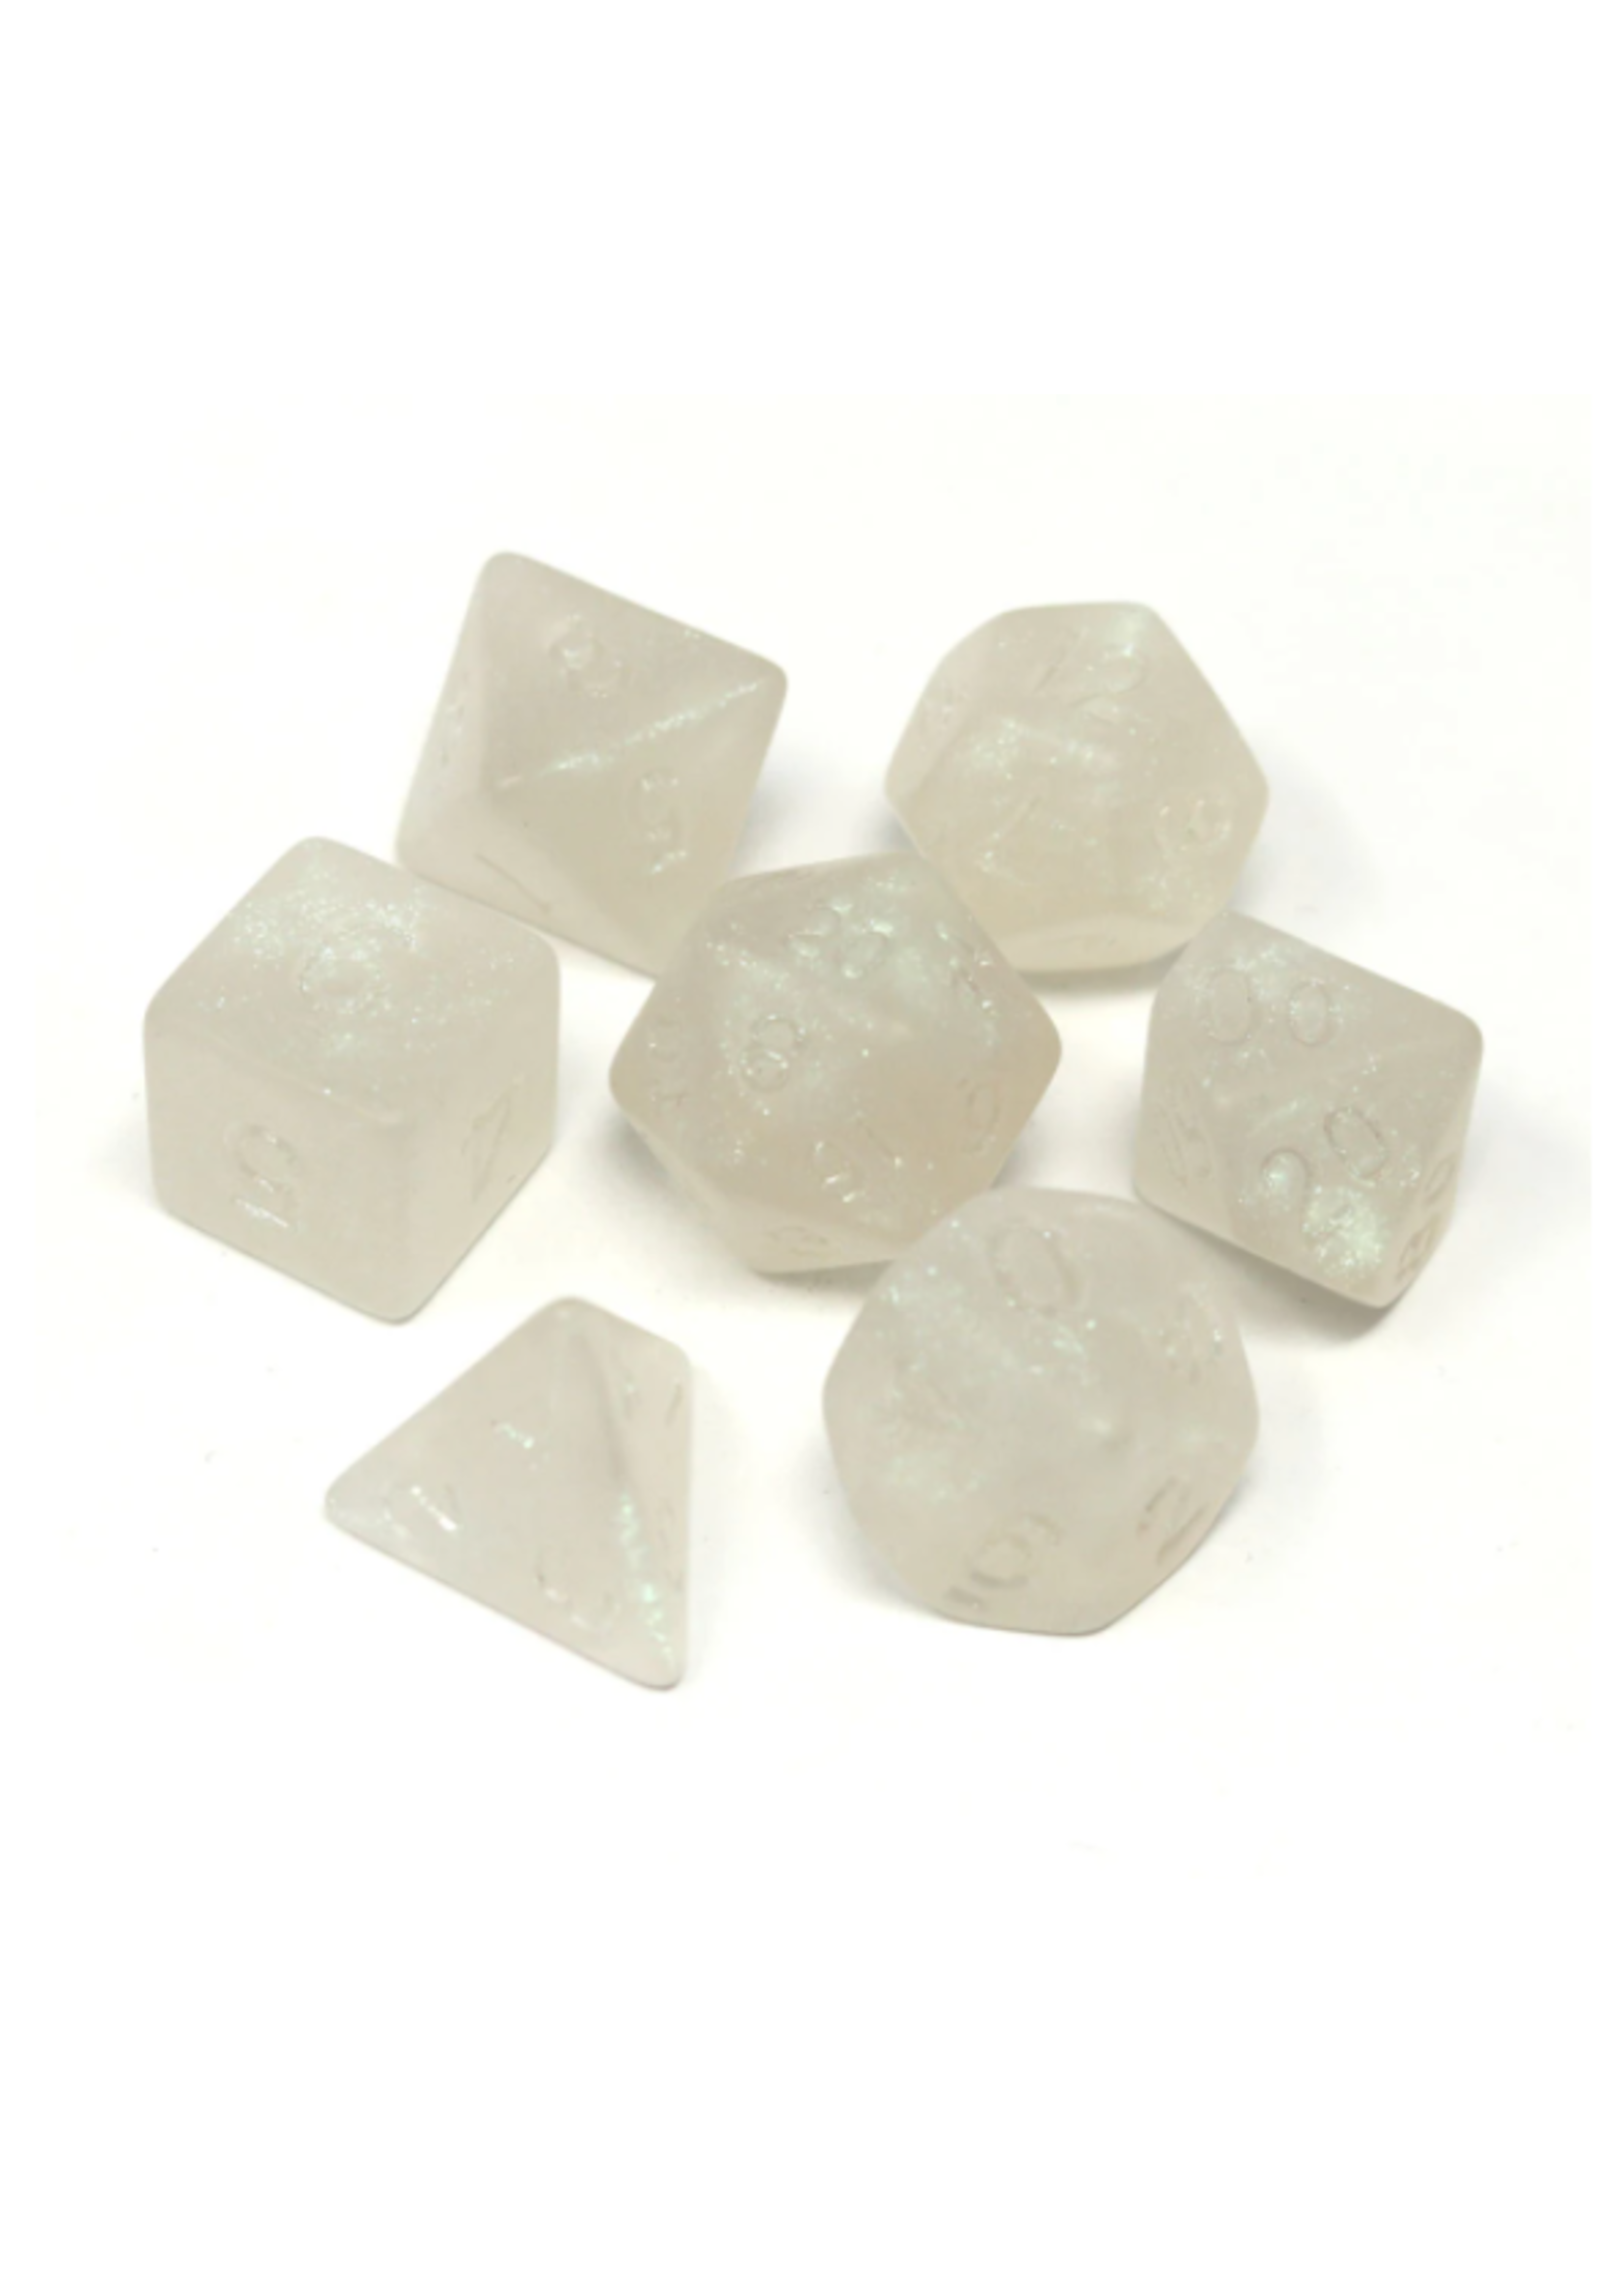 Die Hard Dice Project Dice: Frosted Glacial Moonstone 7 set